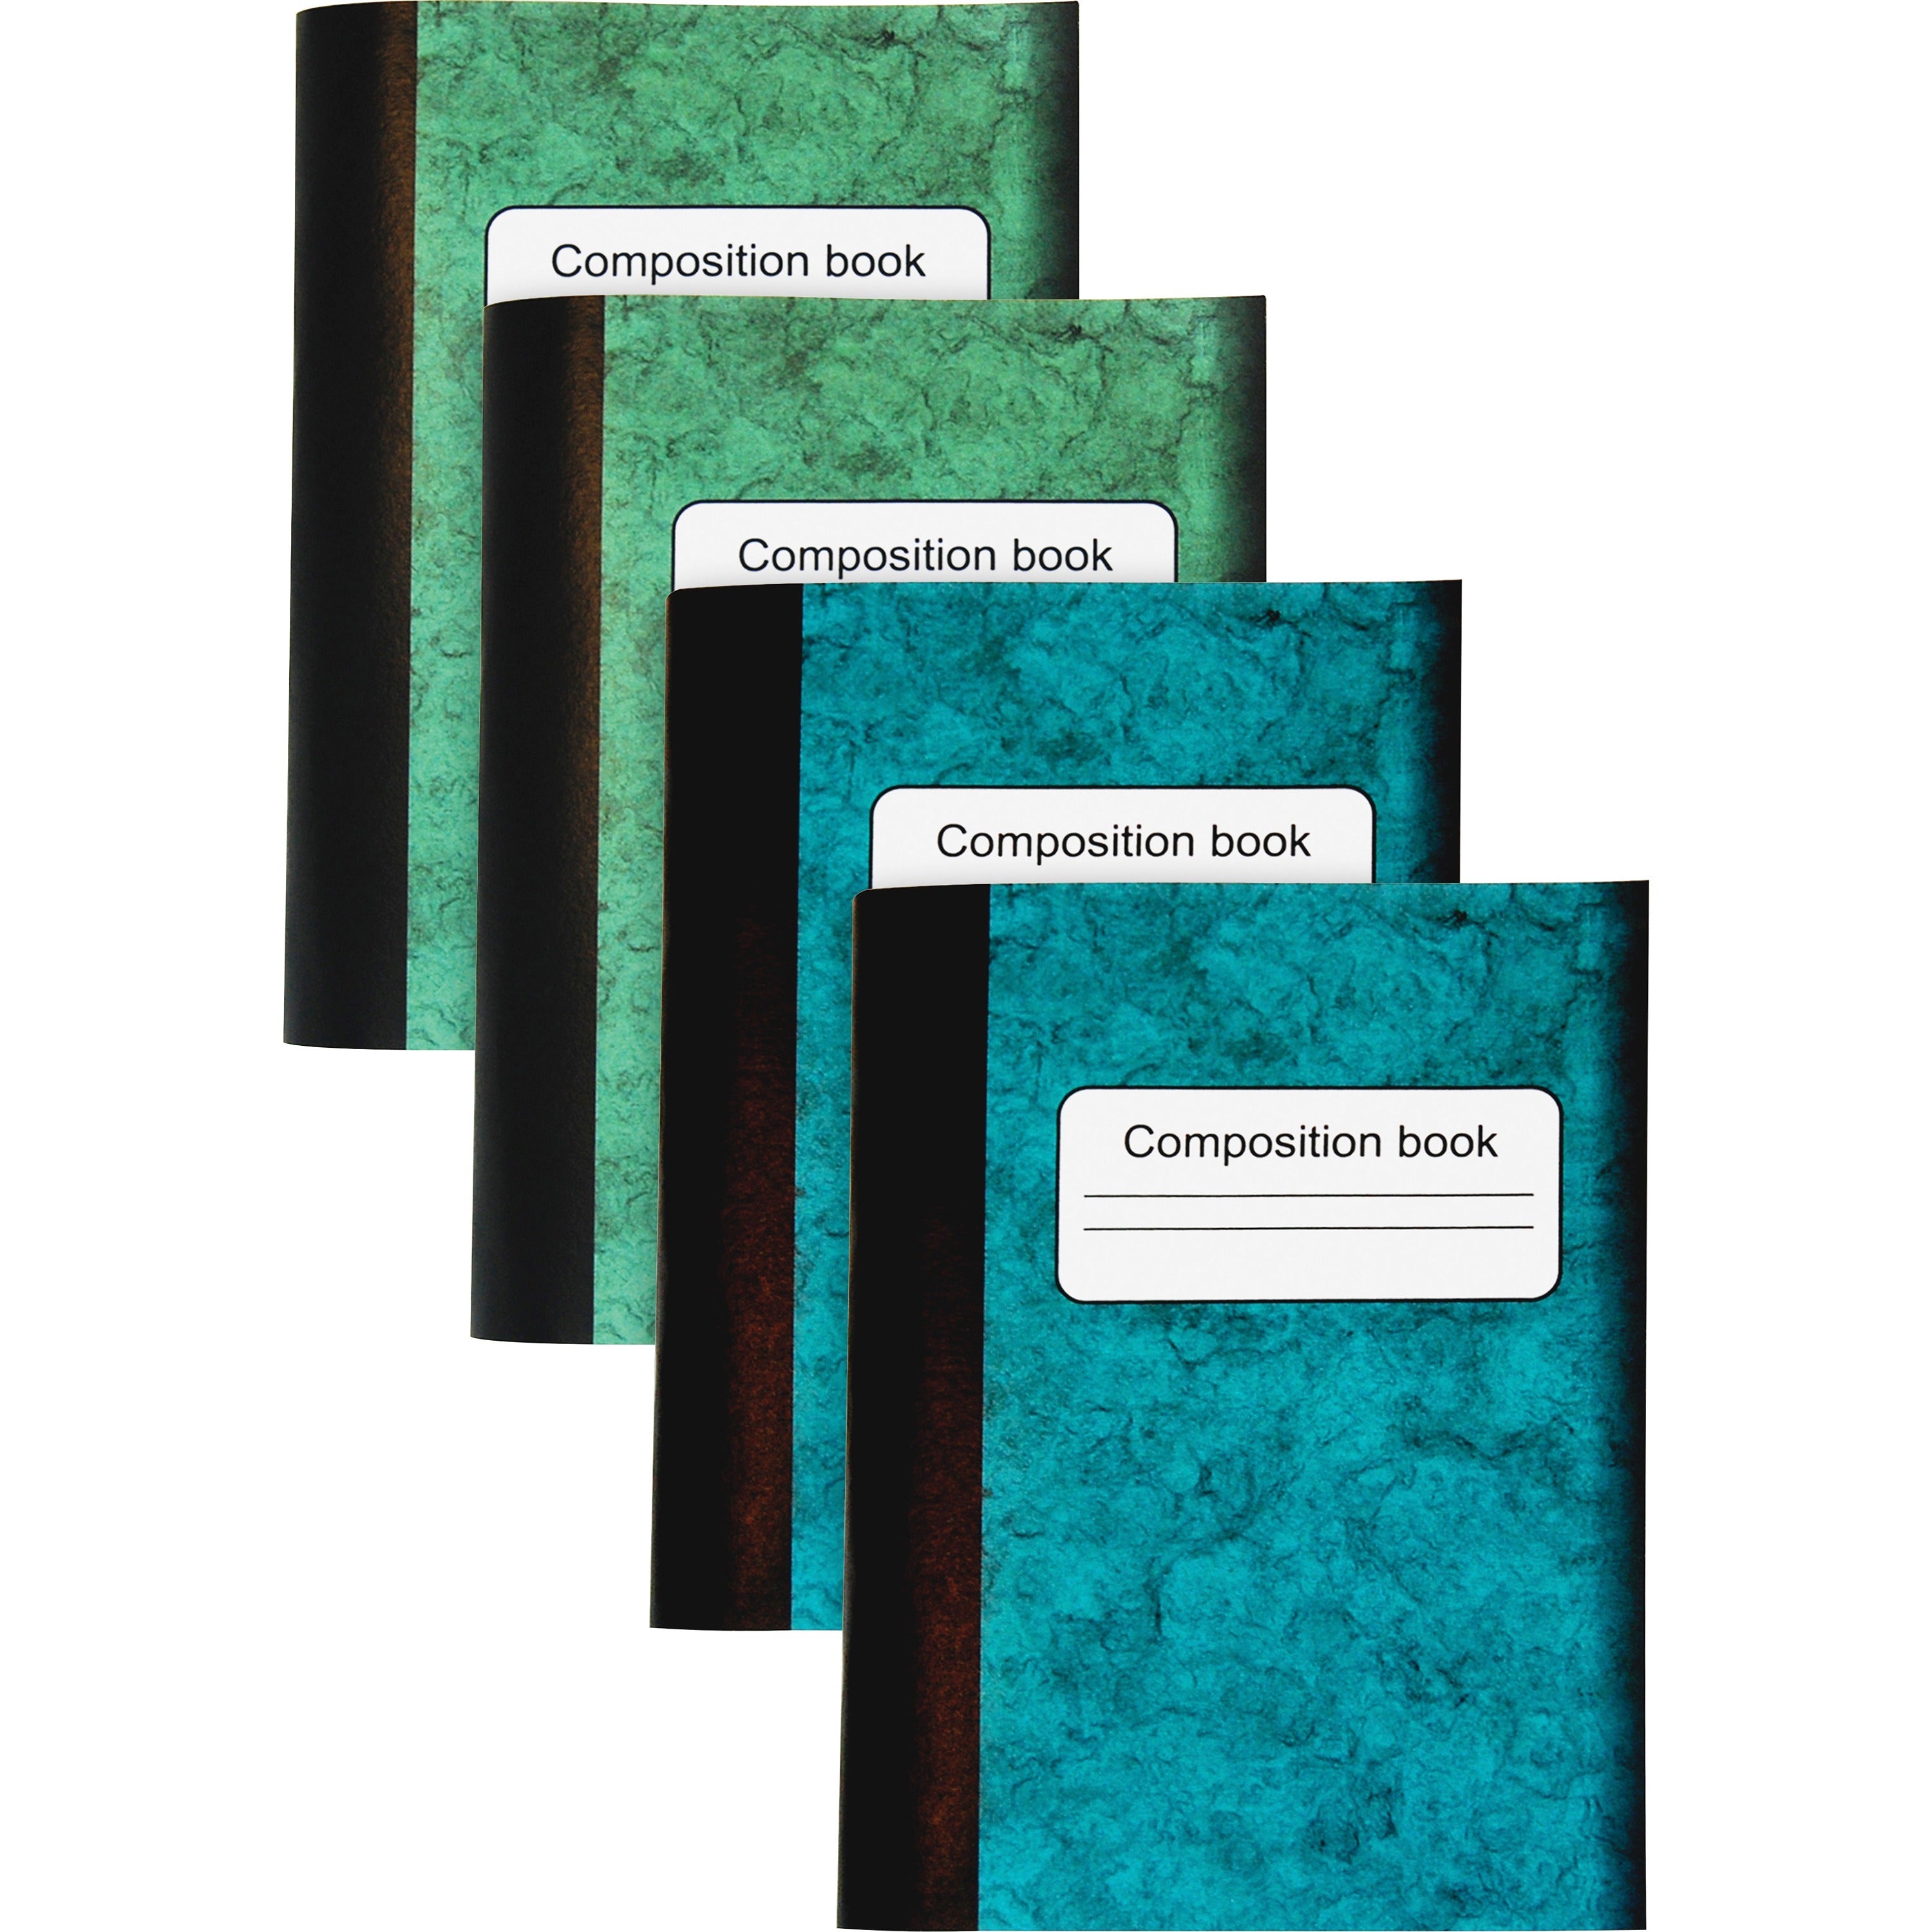 Sparco Composition Books - 80 Sheets - 4.25" x 3.3" - Multi-colored Cover - Sturdy Cover, Durable - 4 / Pack - 